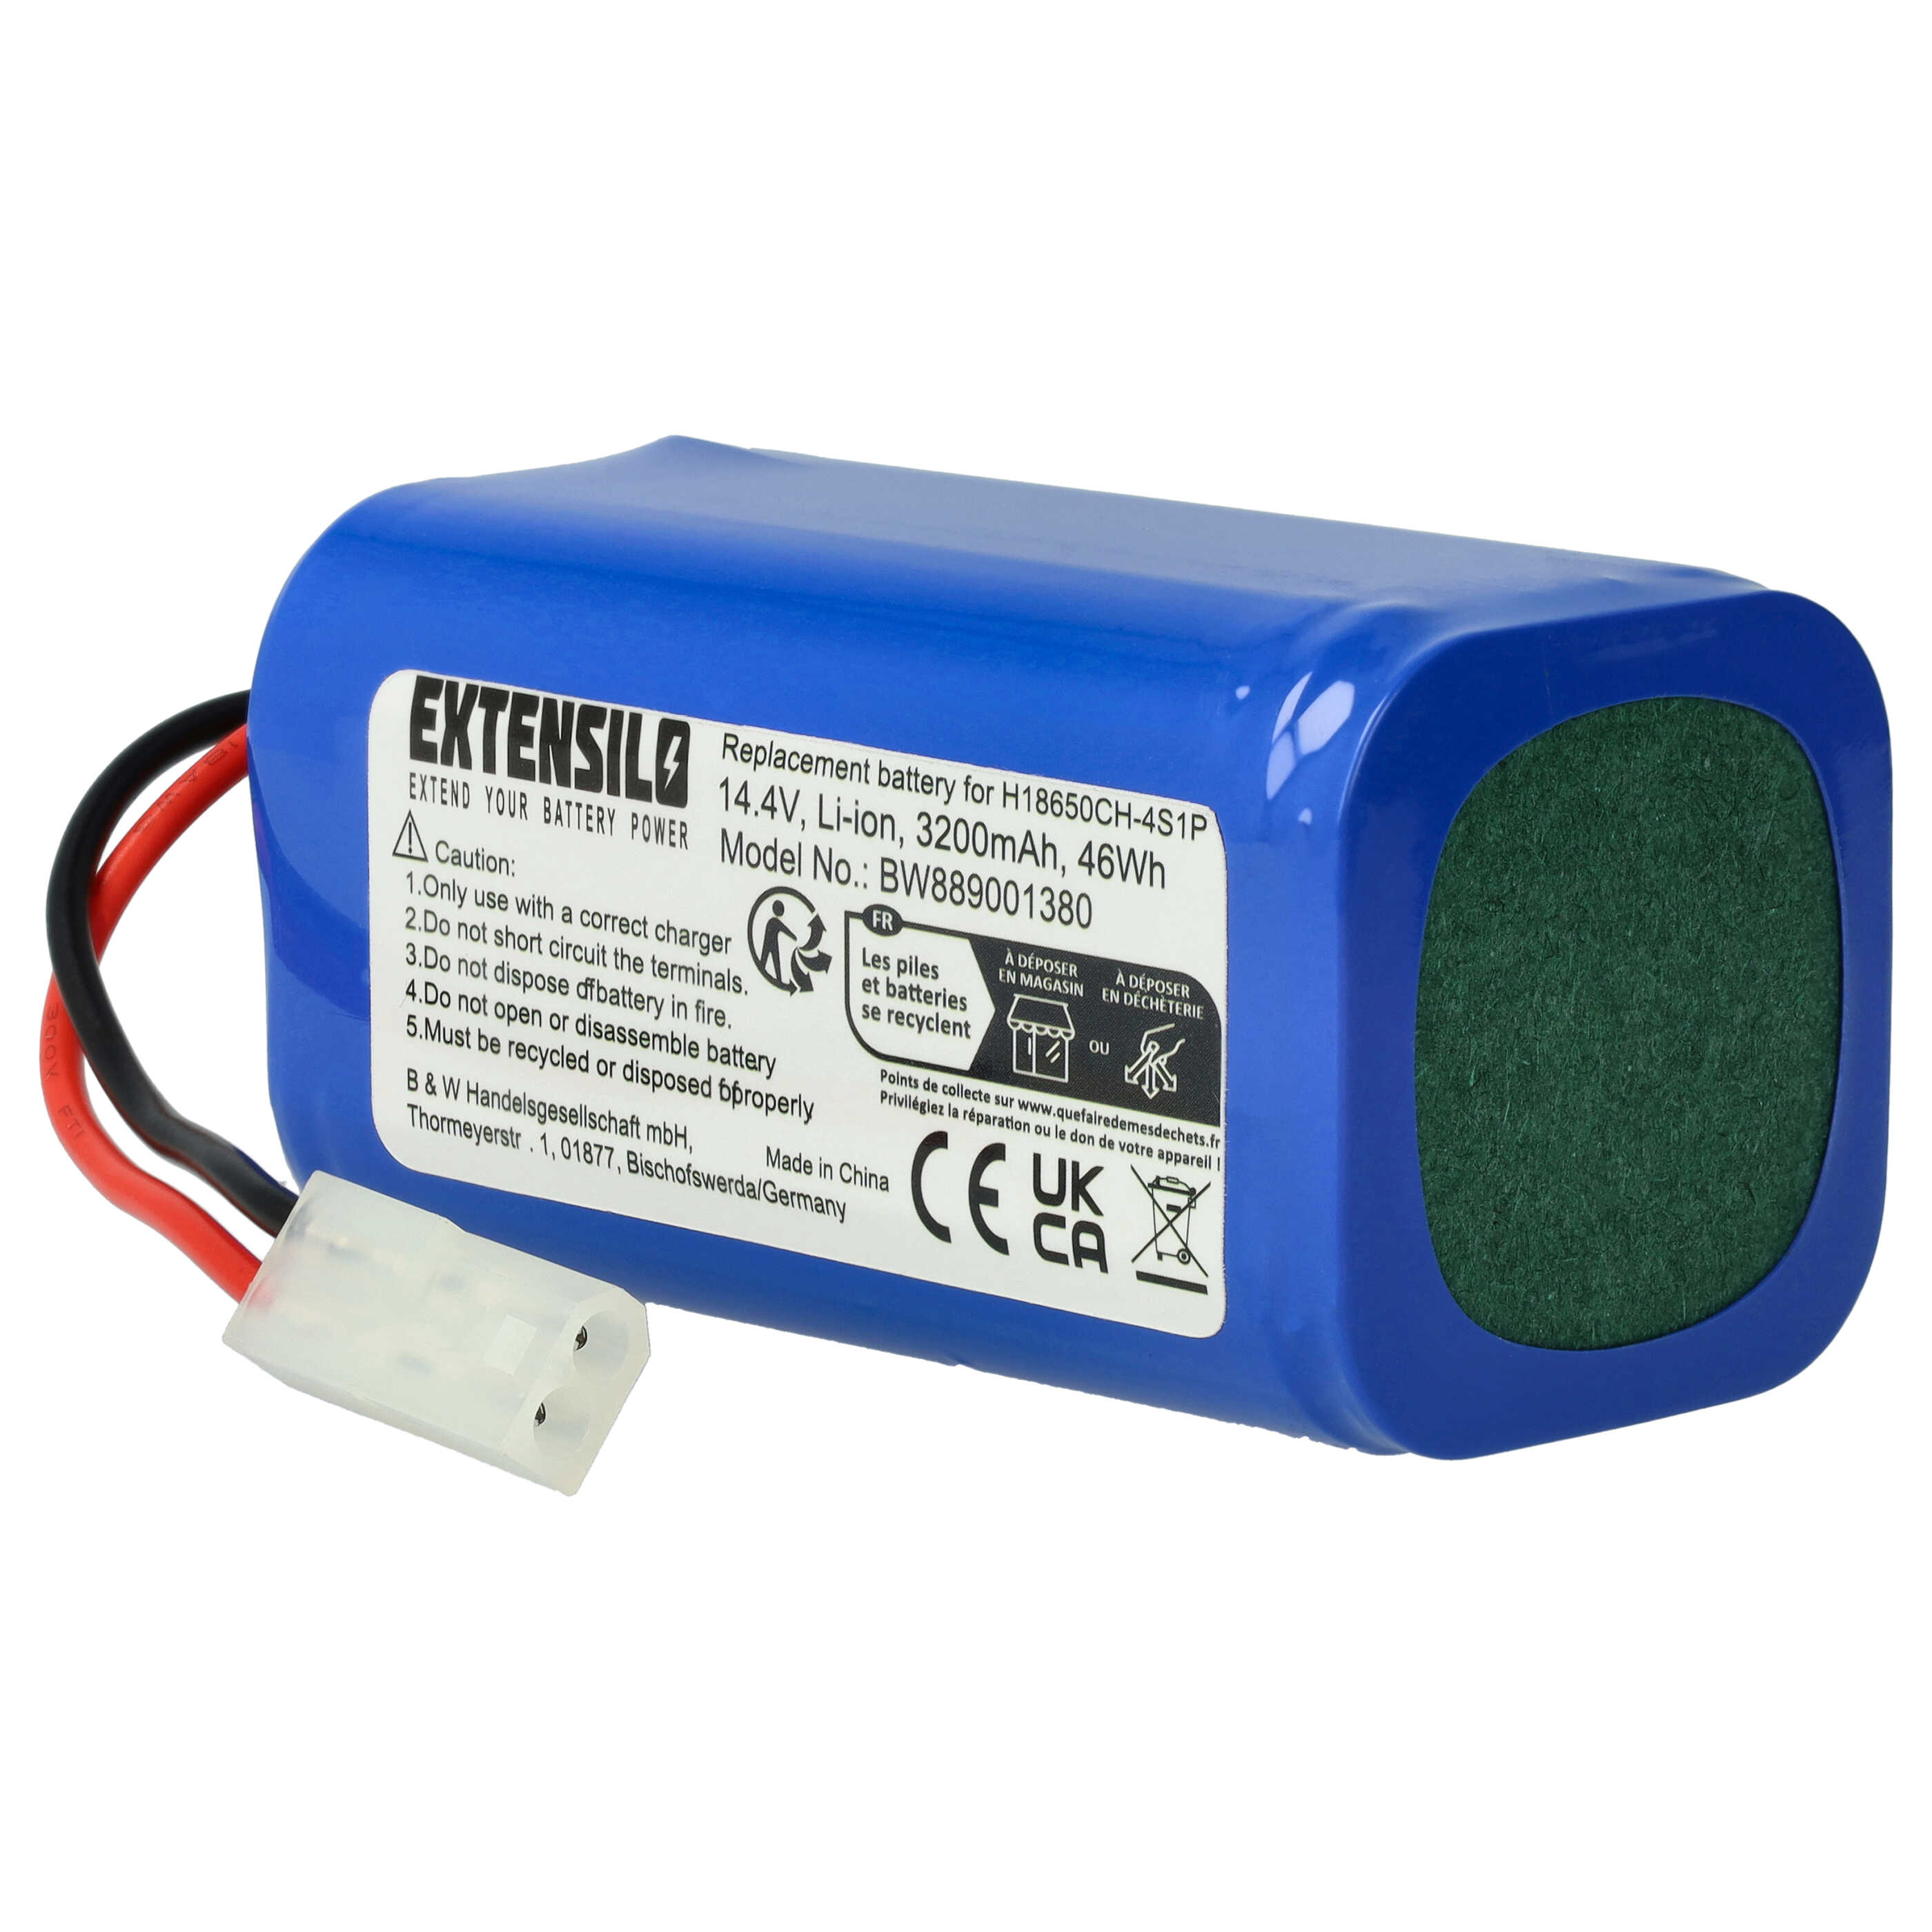 Battery Replacement for Xiaomi H18650CH-4S1P for - 3200mAh, 14.4V, Li-Ion